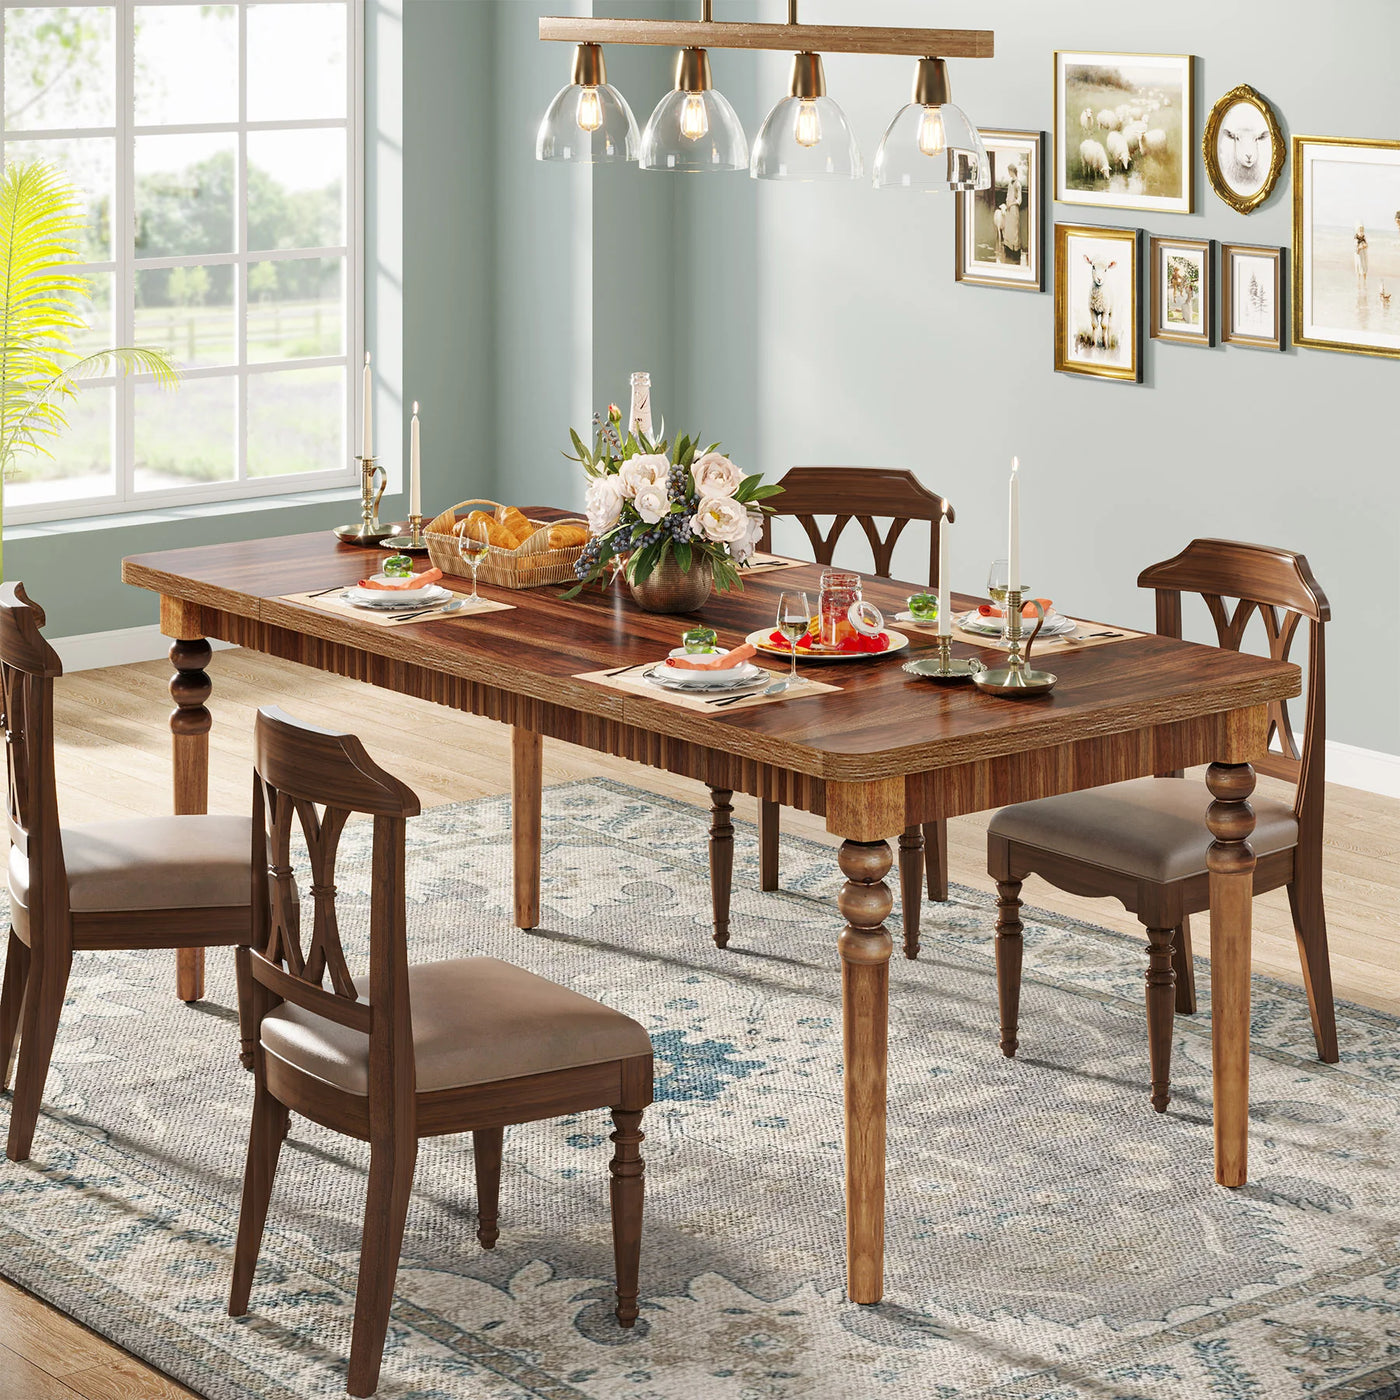 Alexandra Farmhouse Dining Table for 4-6 People | Kitchen Table with Solid Wood Turned Legs